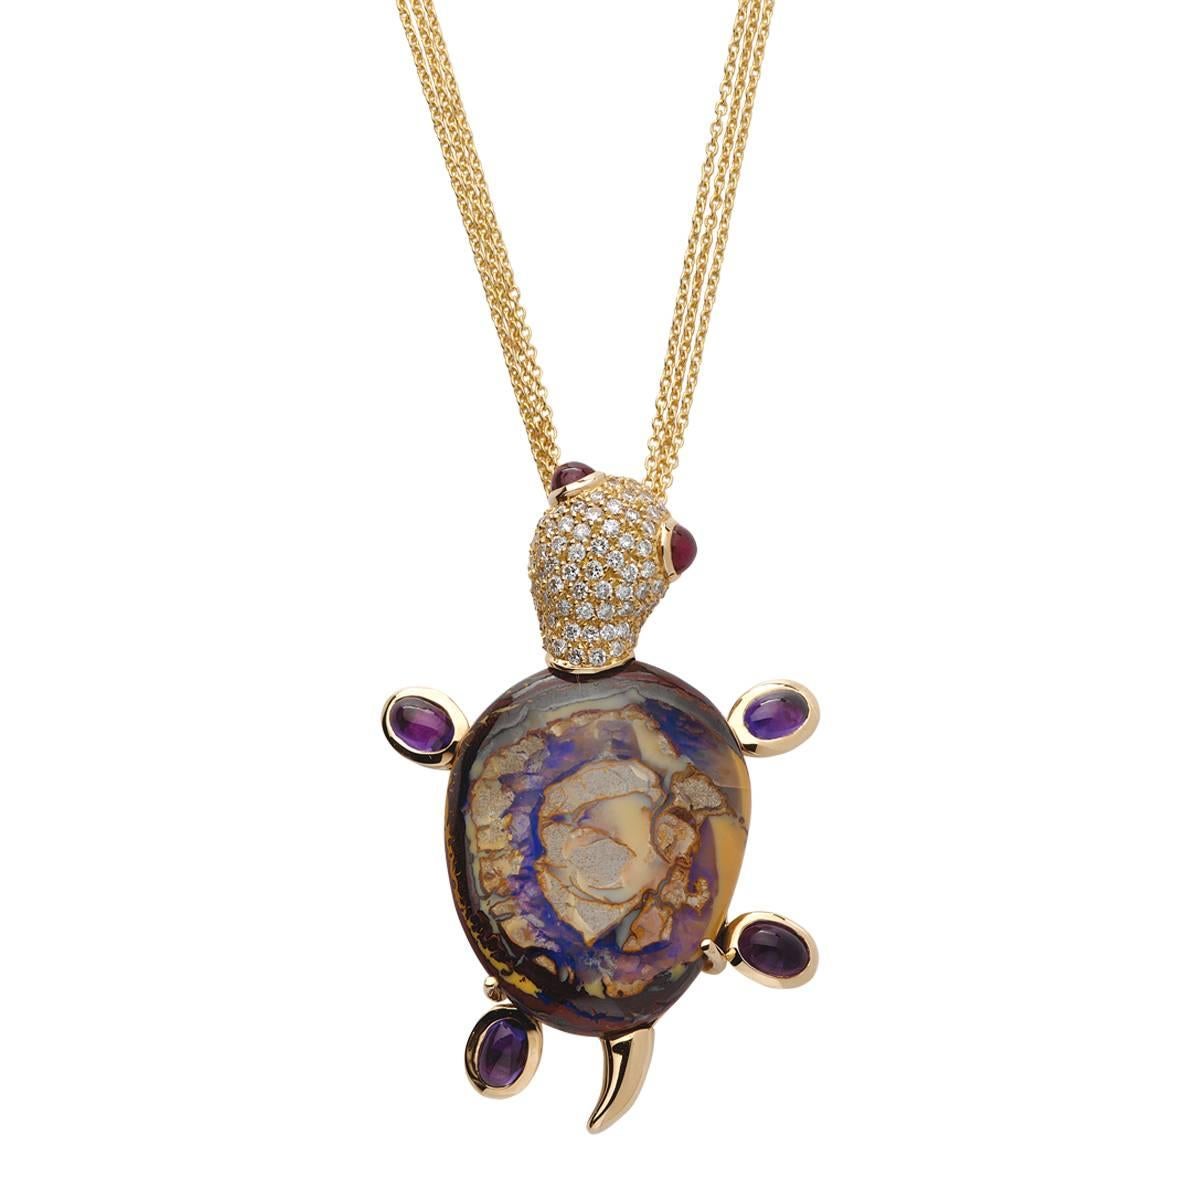 This cute little turtle is crafted in 19.2K yellow gold and set with a boulder opal, white diamonds, rubies and amethysts it is a unique piece because of the shape and colors of the central stone. 
It was conceived has a brooch but can be worn as a